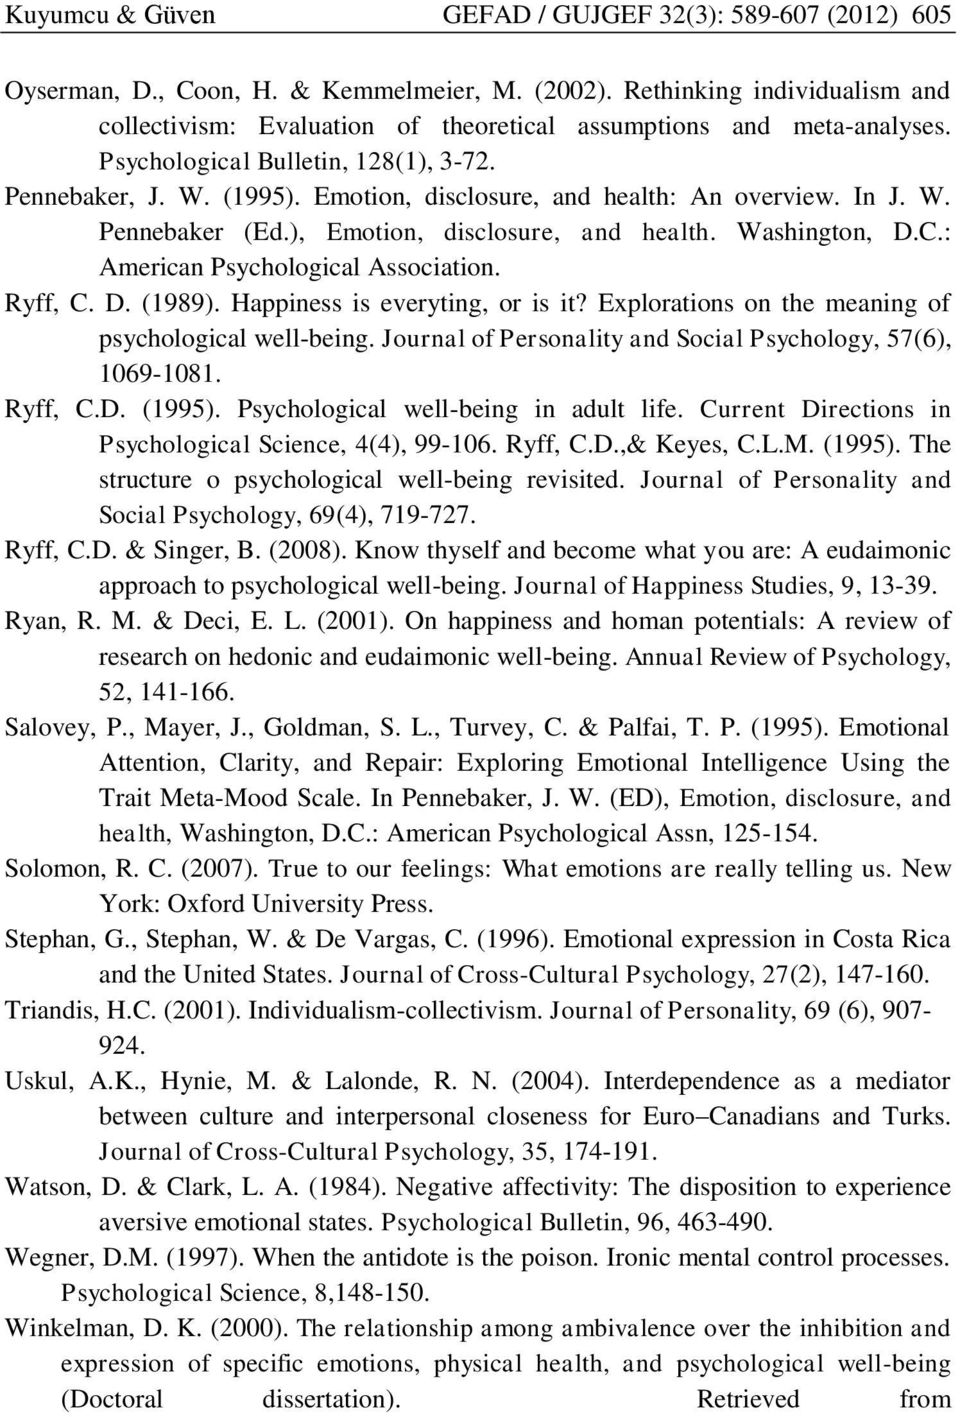 Emotion, disclosure, and health: An overview. In J. W. Pennebaker (Ed.), Emotion, disclosure, and health. Washington, D.C.: American Psychological Association. Ryff, C. D. (1989).